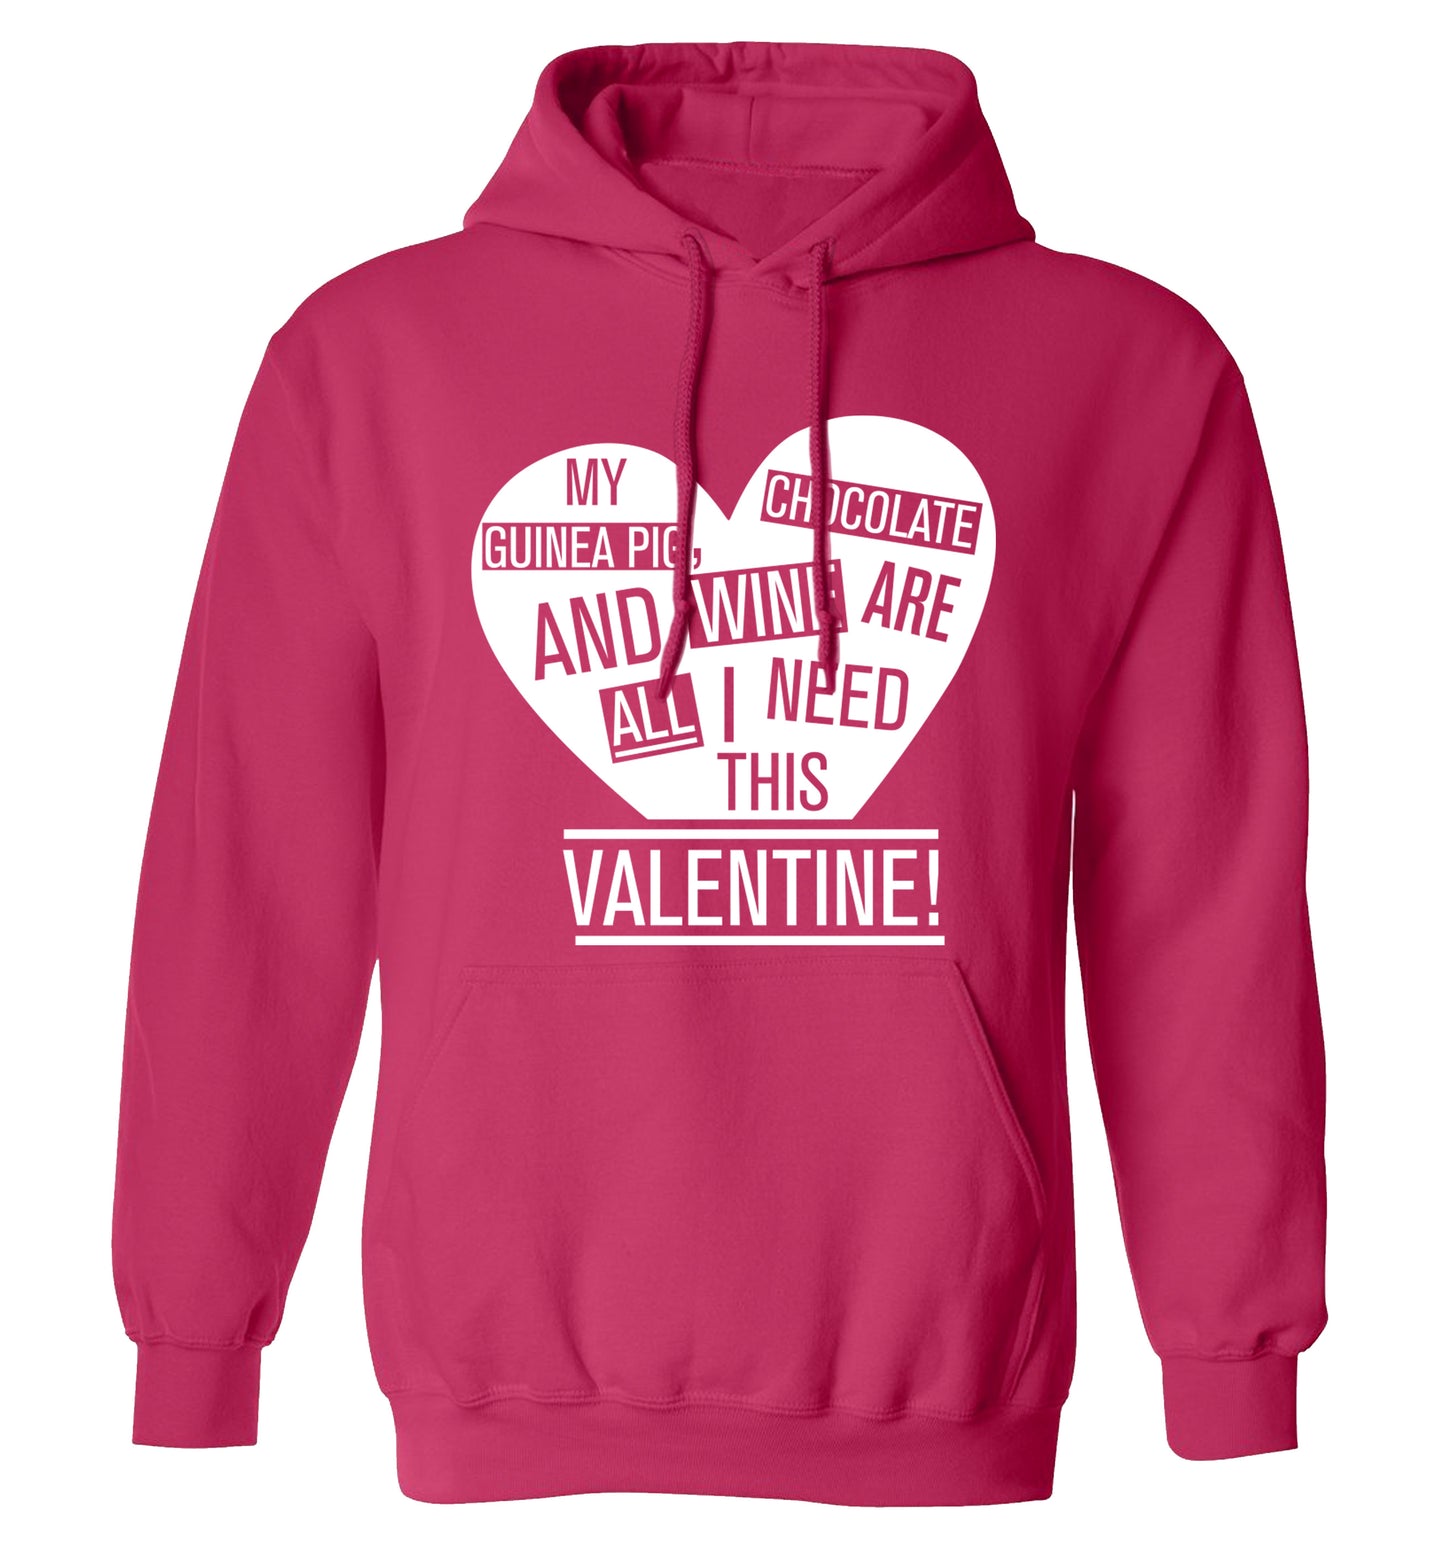 My guinea pig, chocolate and wine are all I need this valentine! adults unisex pink hoodie 2XL